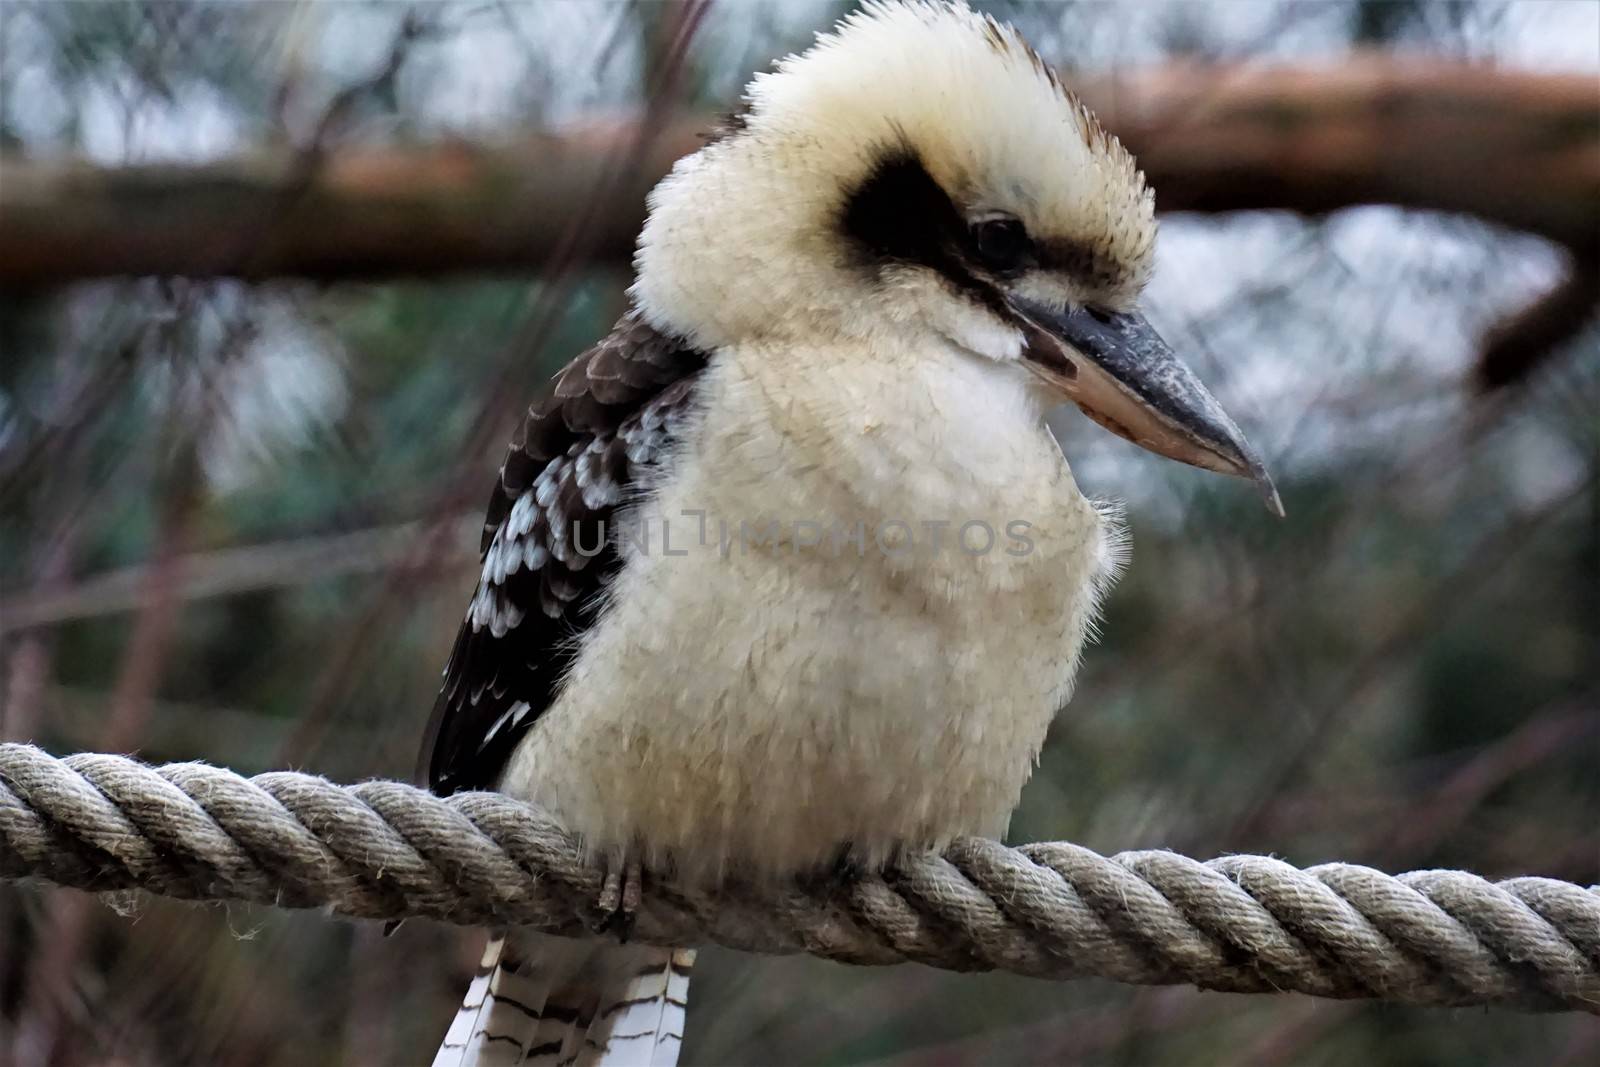 Laughing kookaburra sitting on a rope by pisces2386